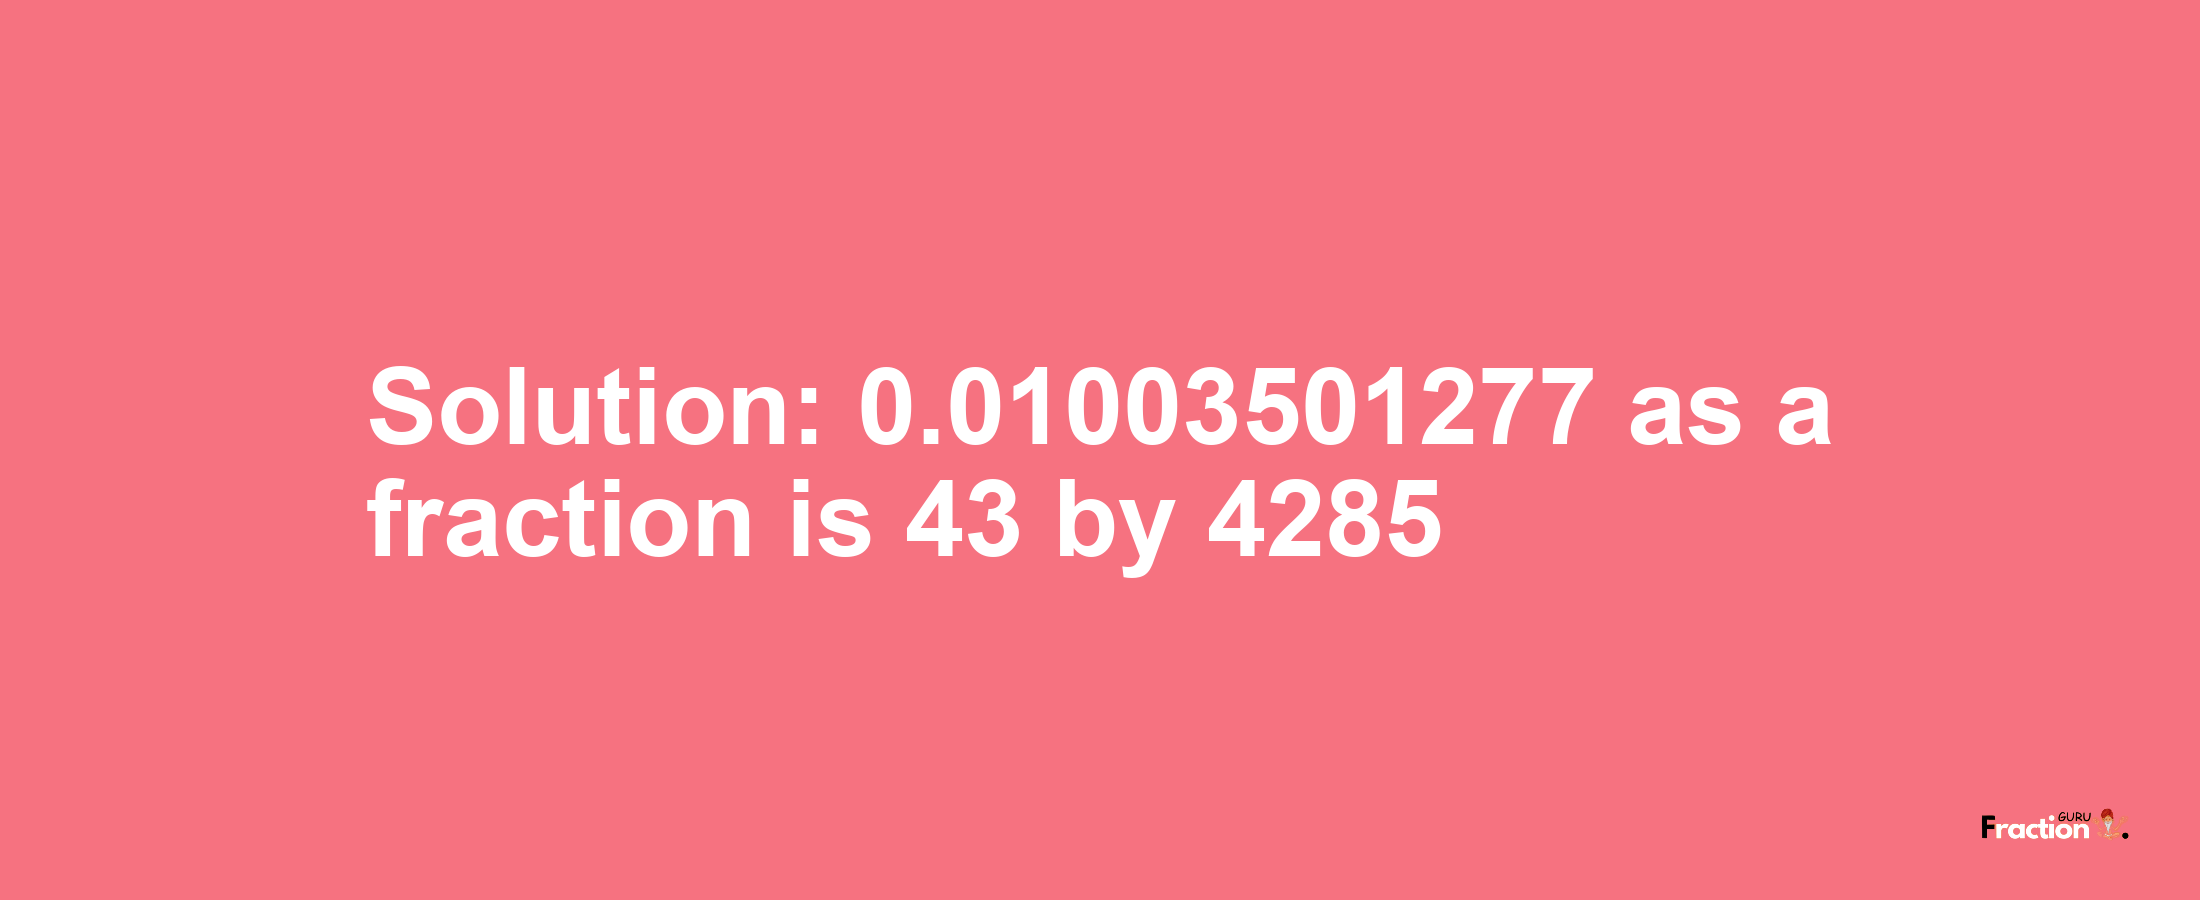 Solution:0.01003501277 as a fraction is 43/4285